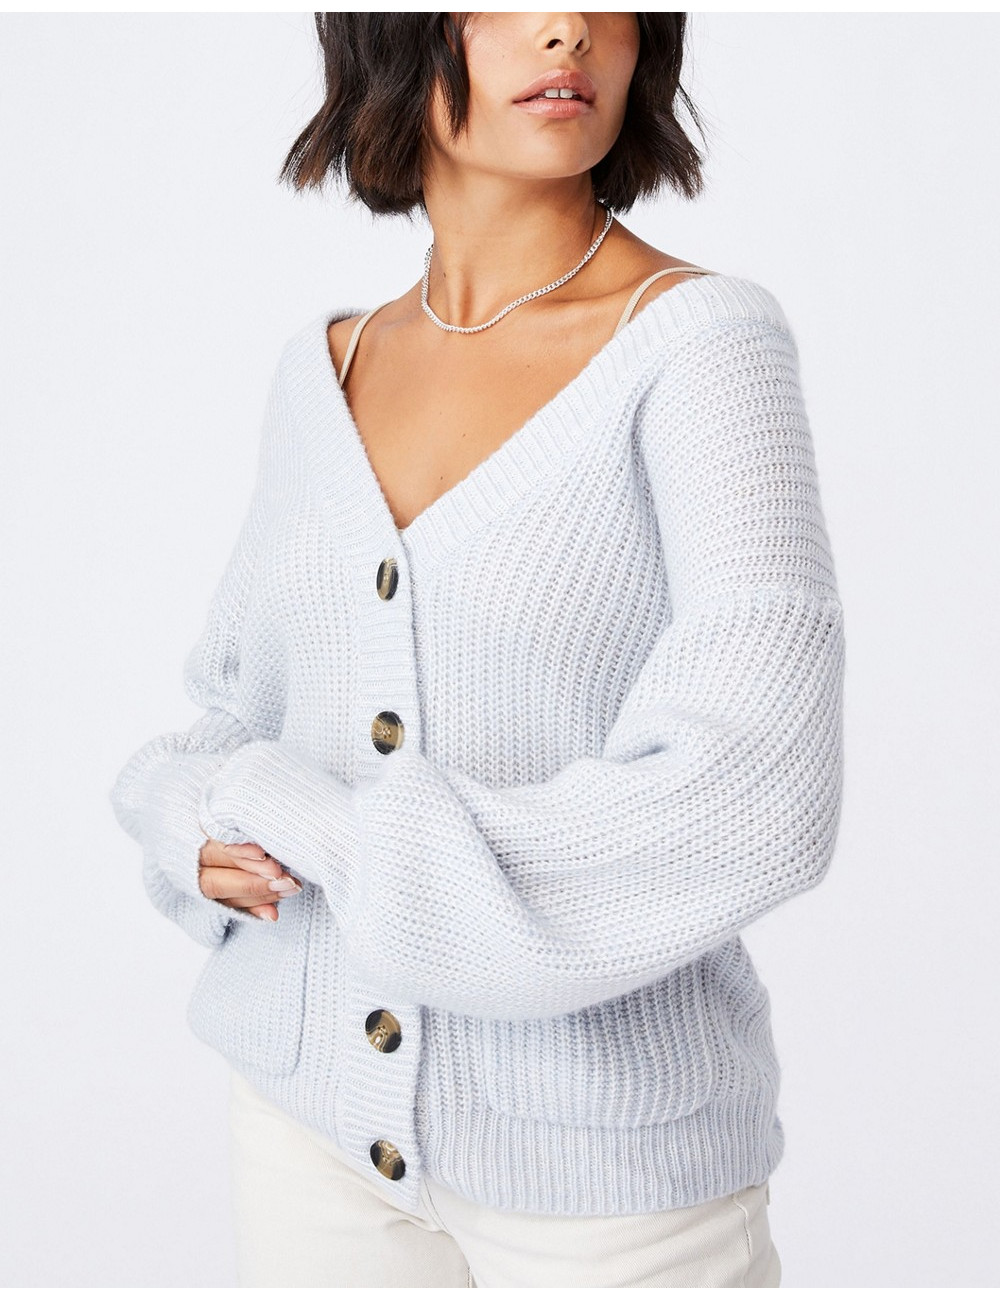 Cotton:On dad cardigan in blue